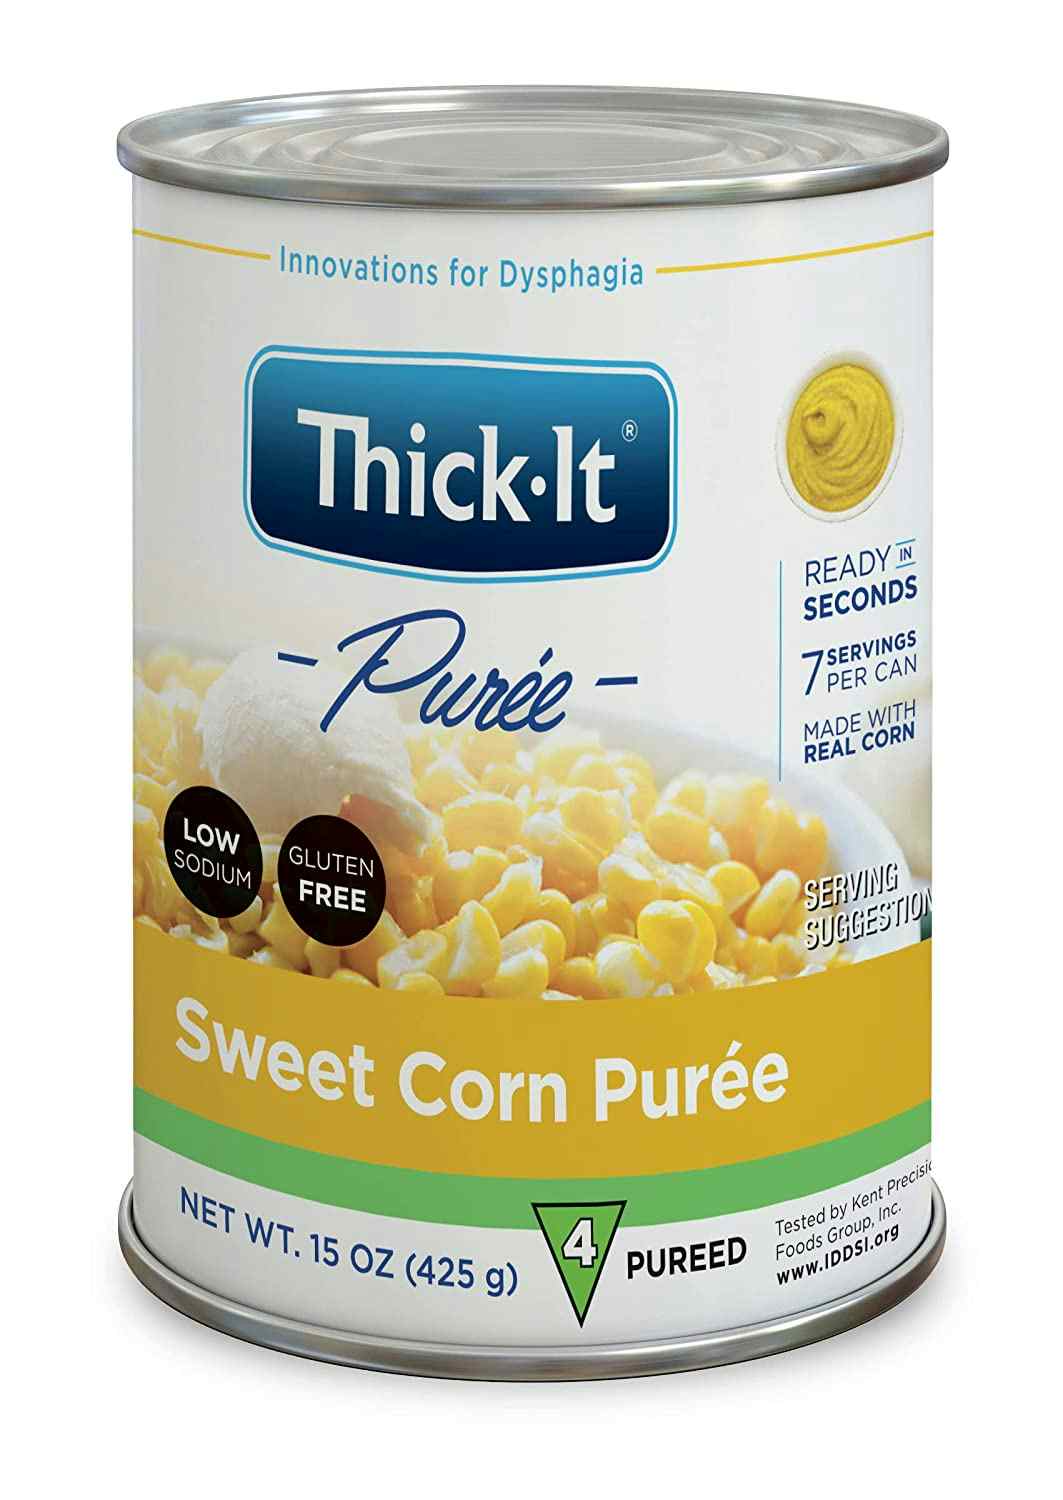 Thick-it Puree Sweet Corn Flavor, H304-F8800-EA1, 1 Can